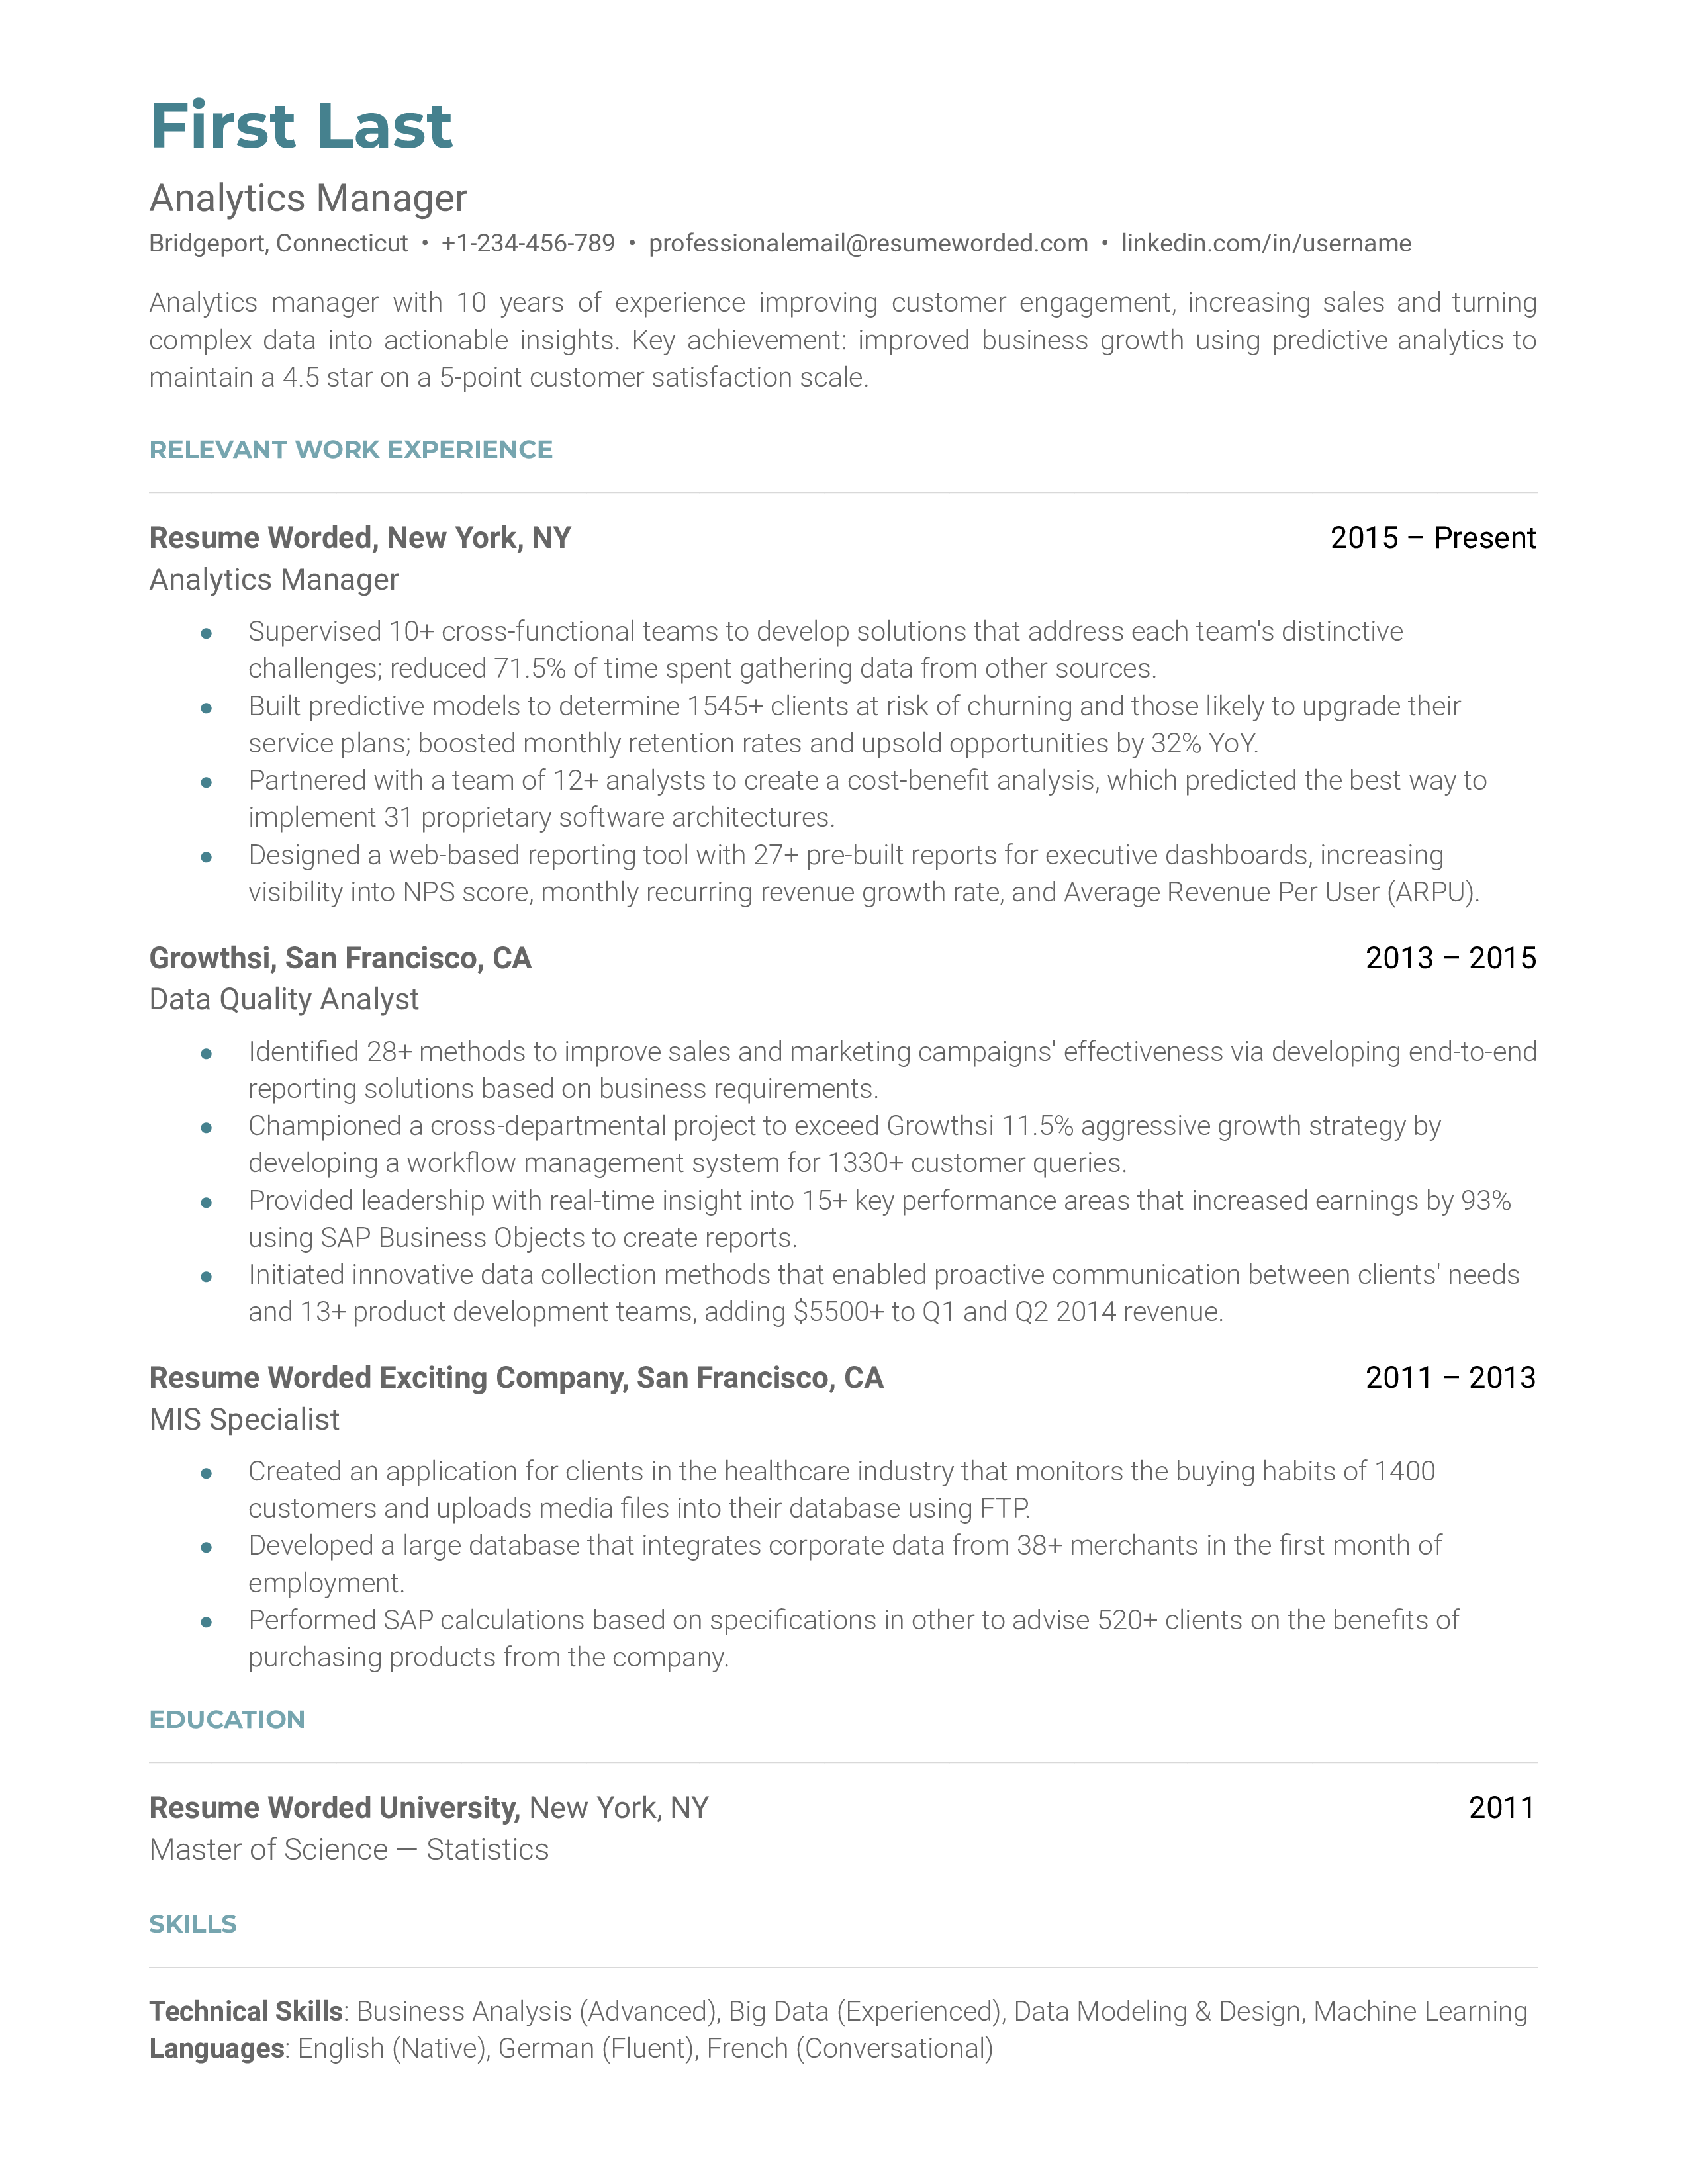 A well-crafted CV for an Analytics Manager position.